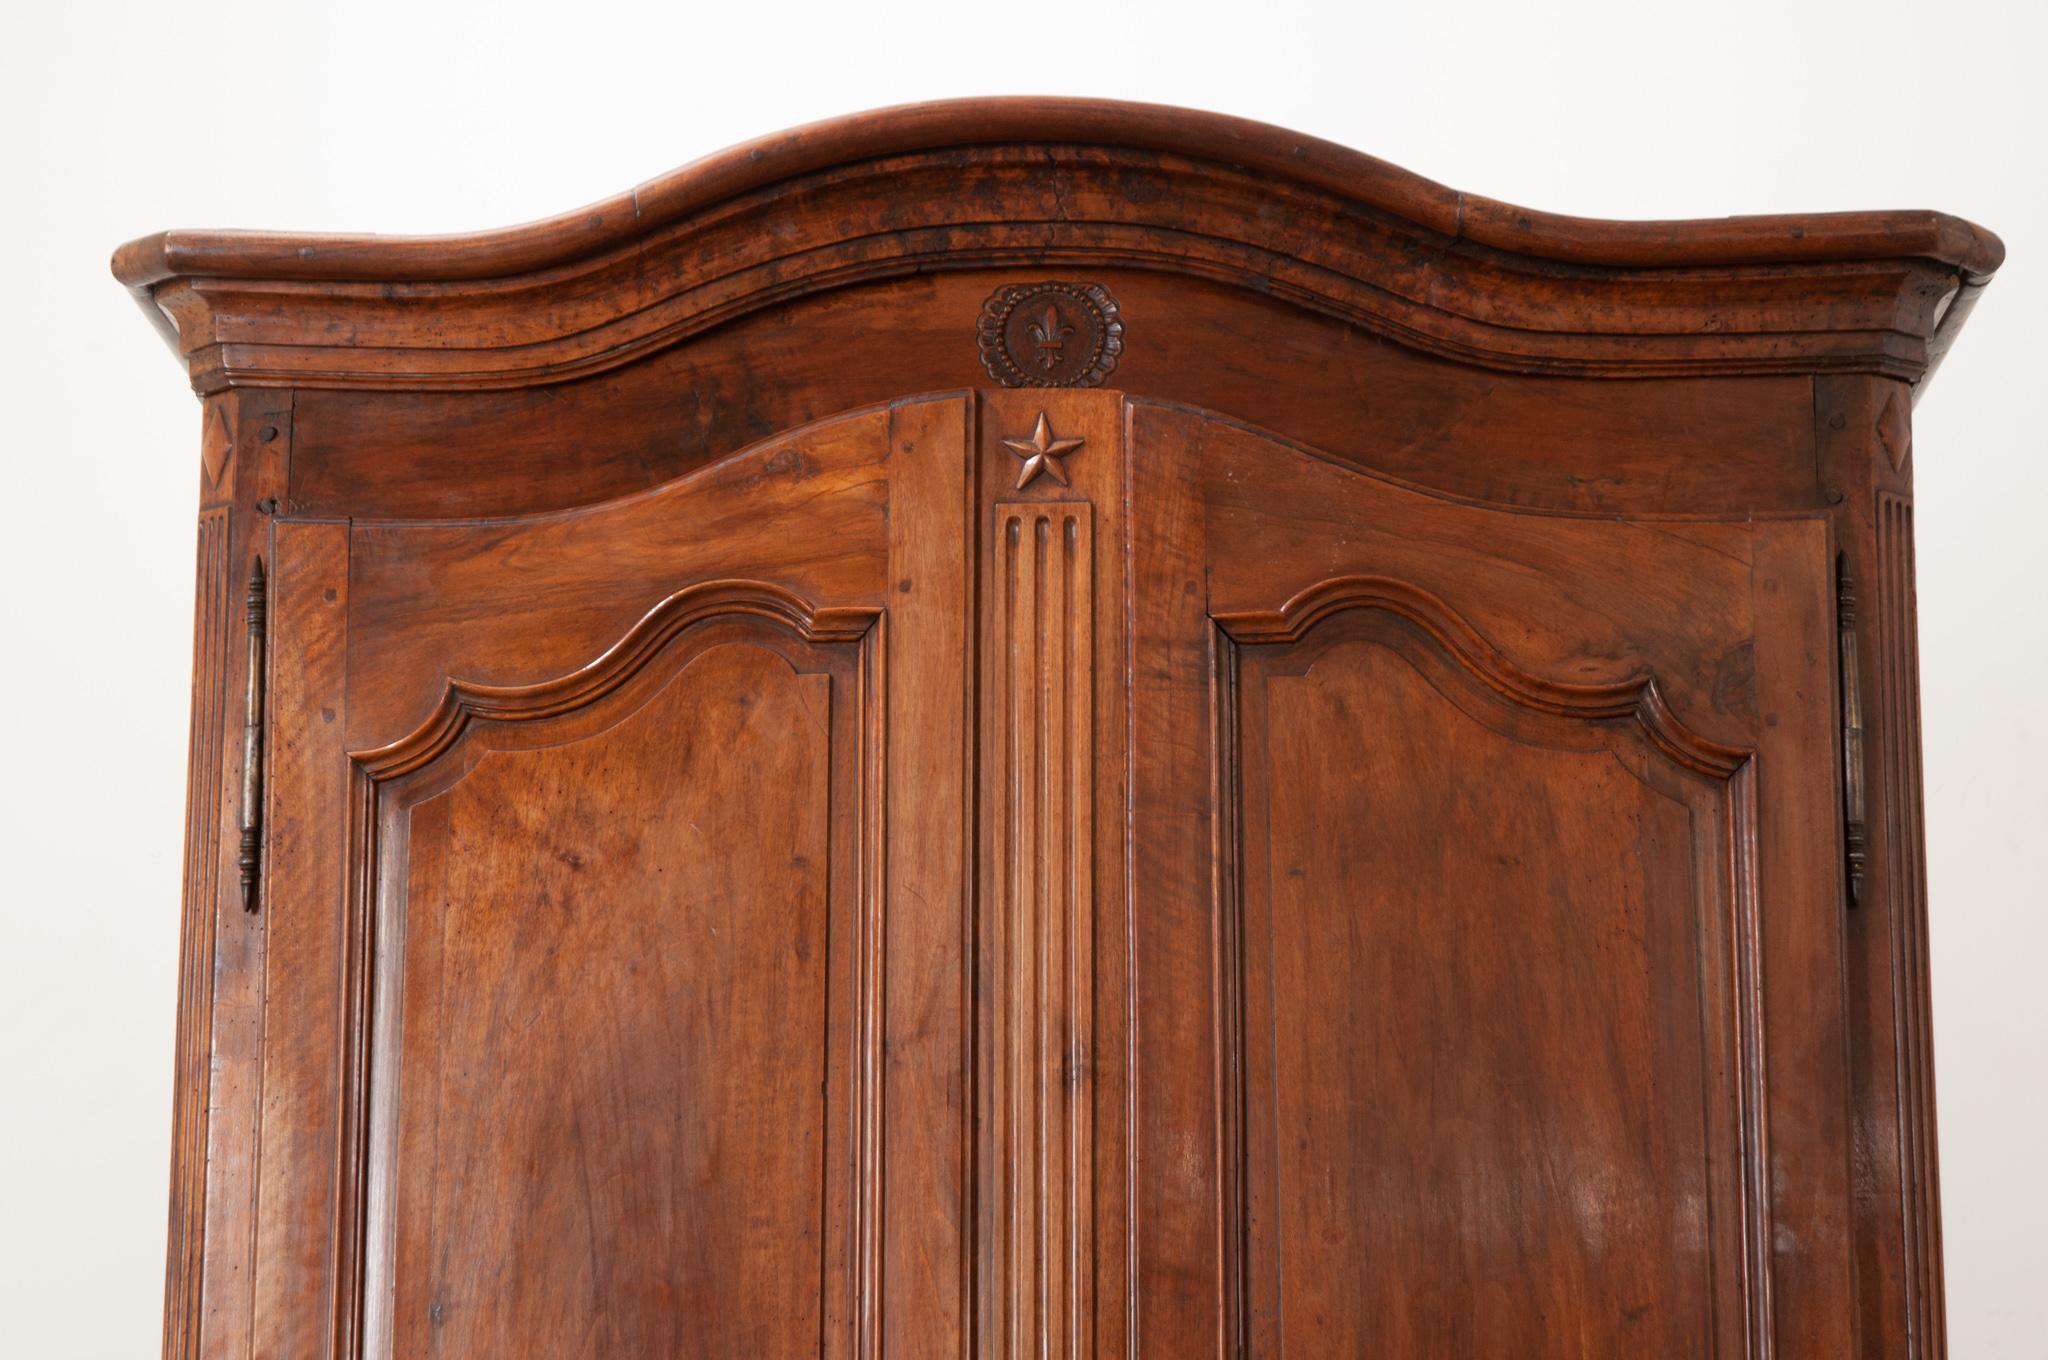 French 18th Century Solid Walnut Armoire In Good Condition For Sale In Baton Rouge, LA